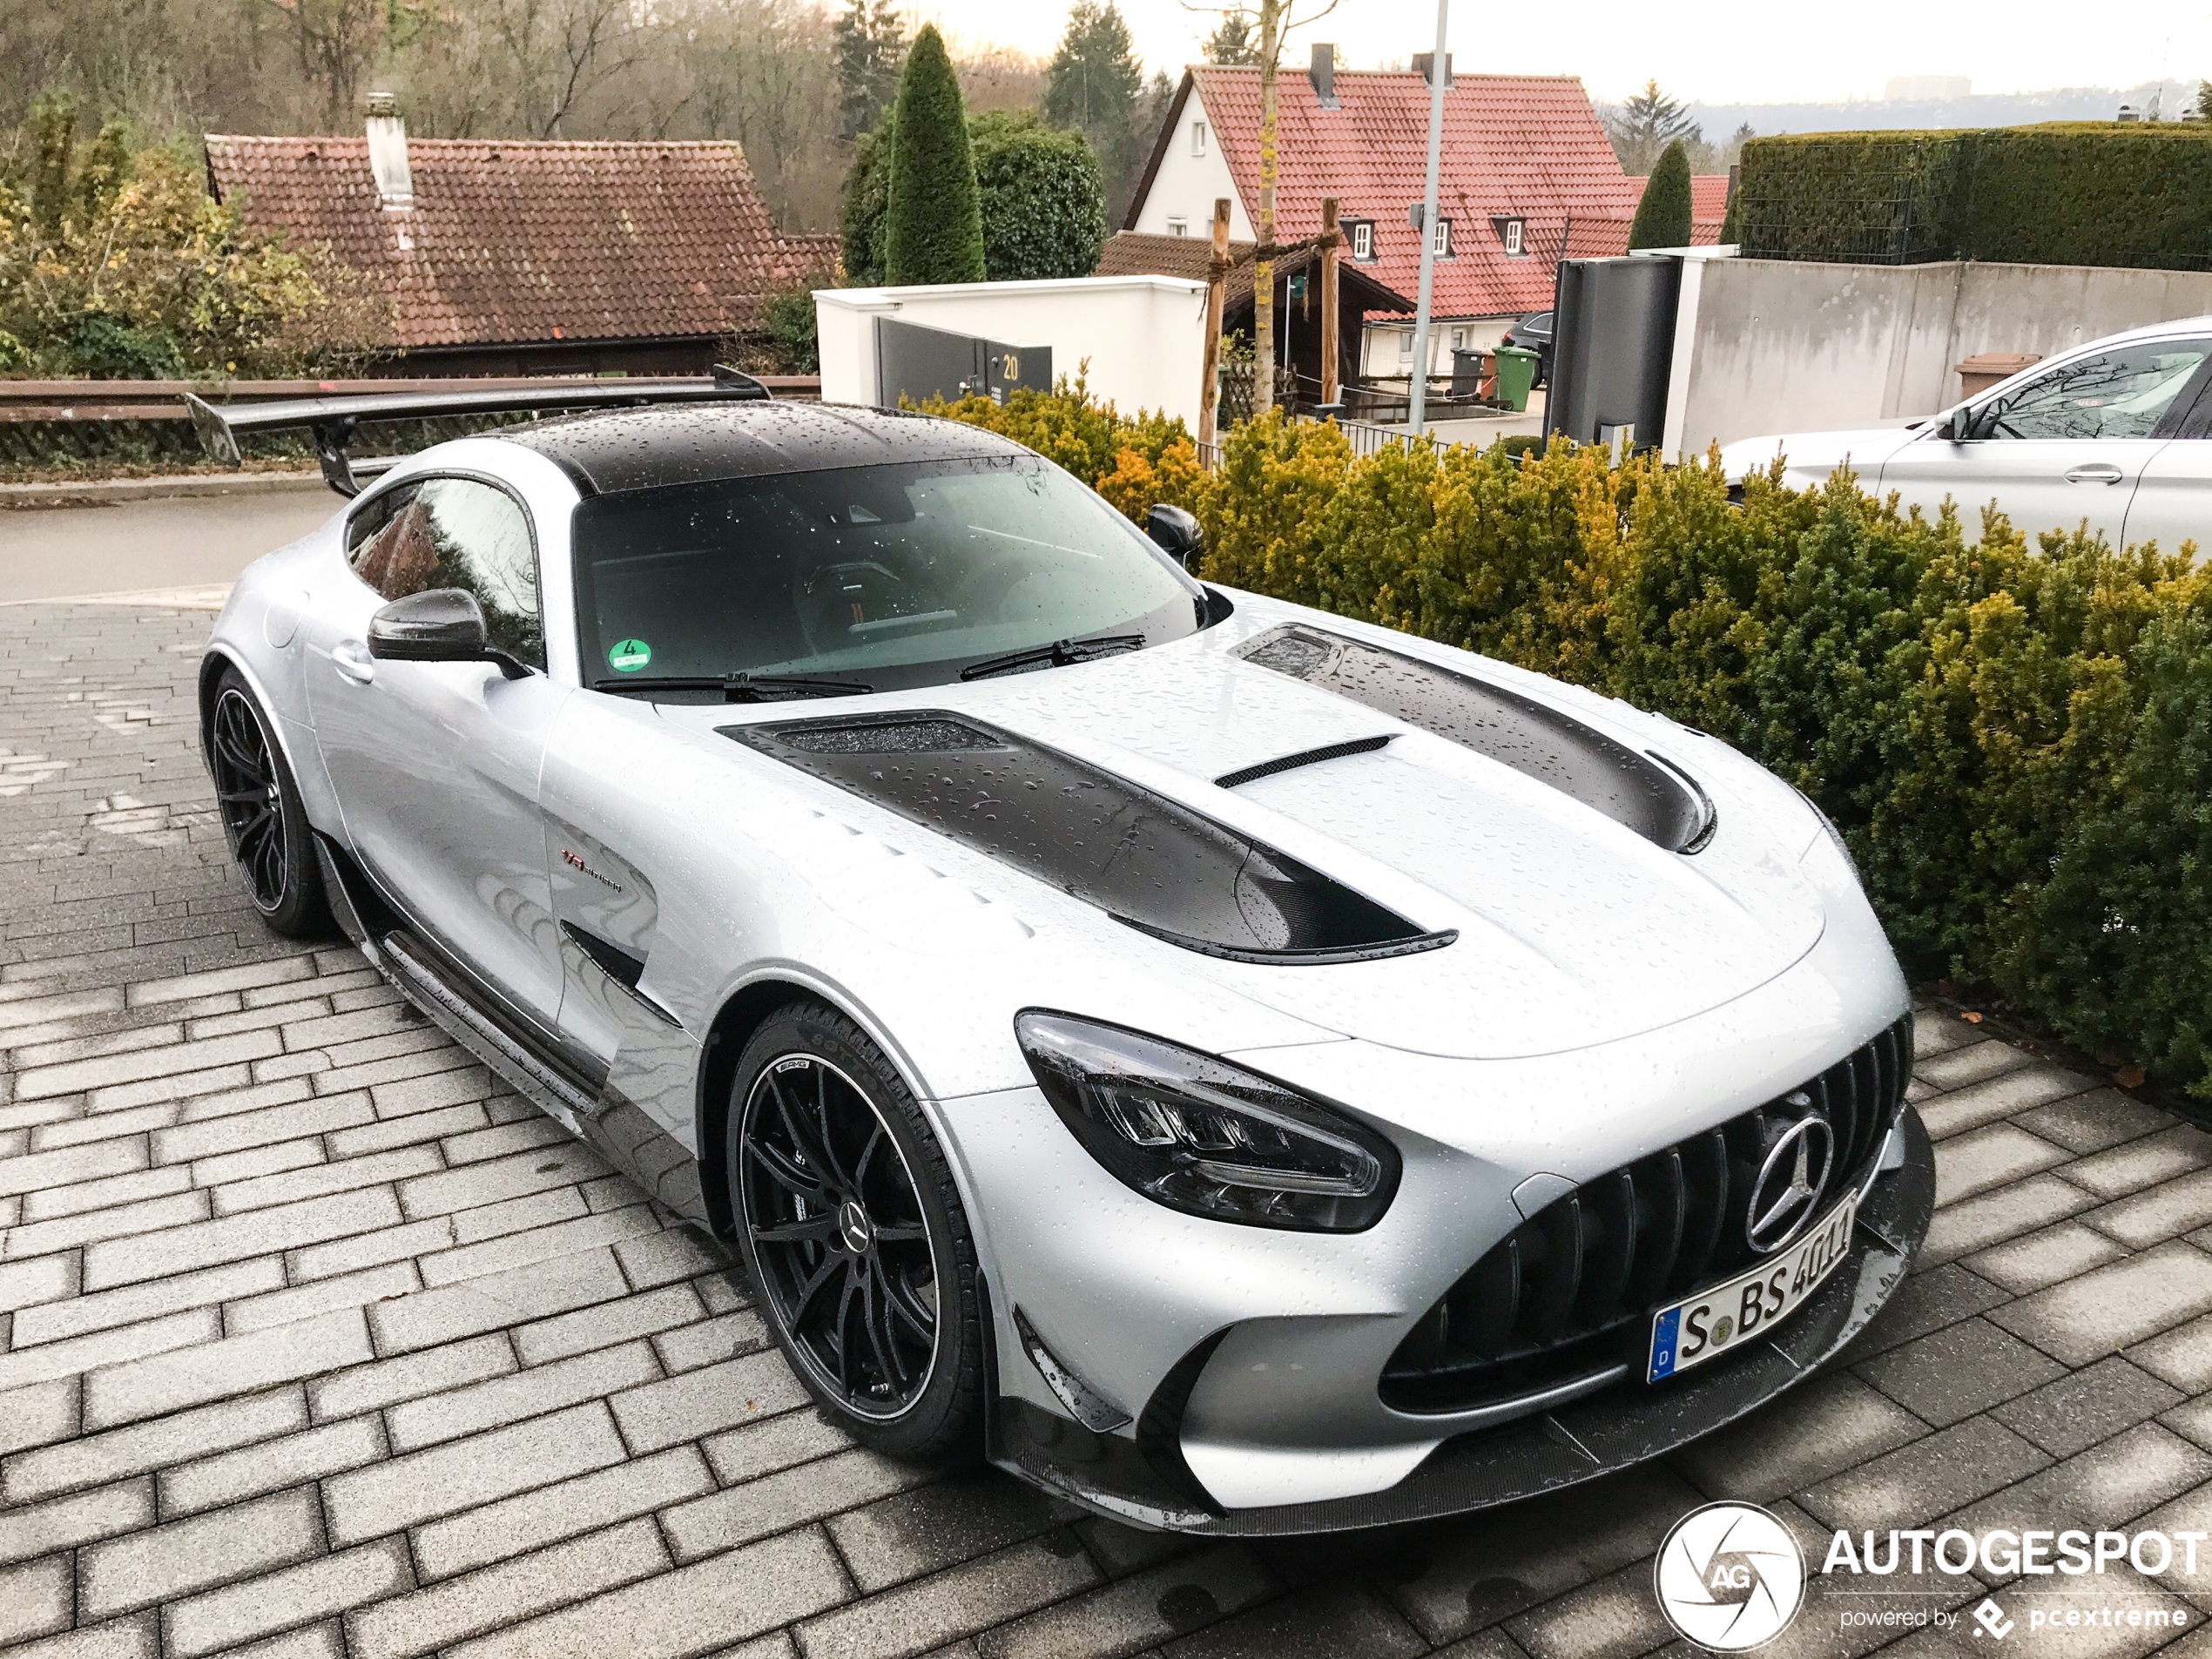 The beast of the beasts has been spotted: Mercedes-AMG GT Black Series